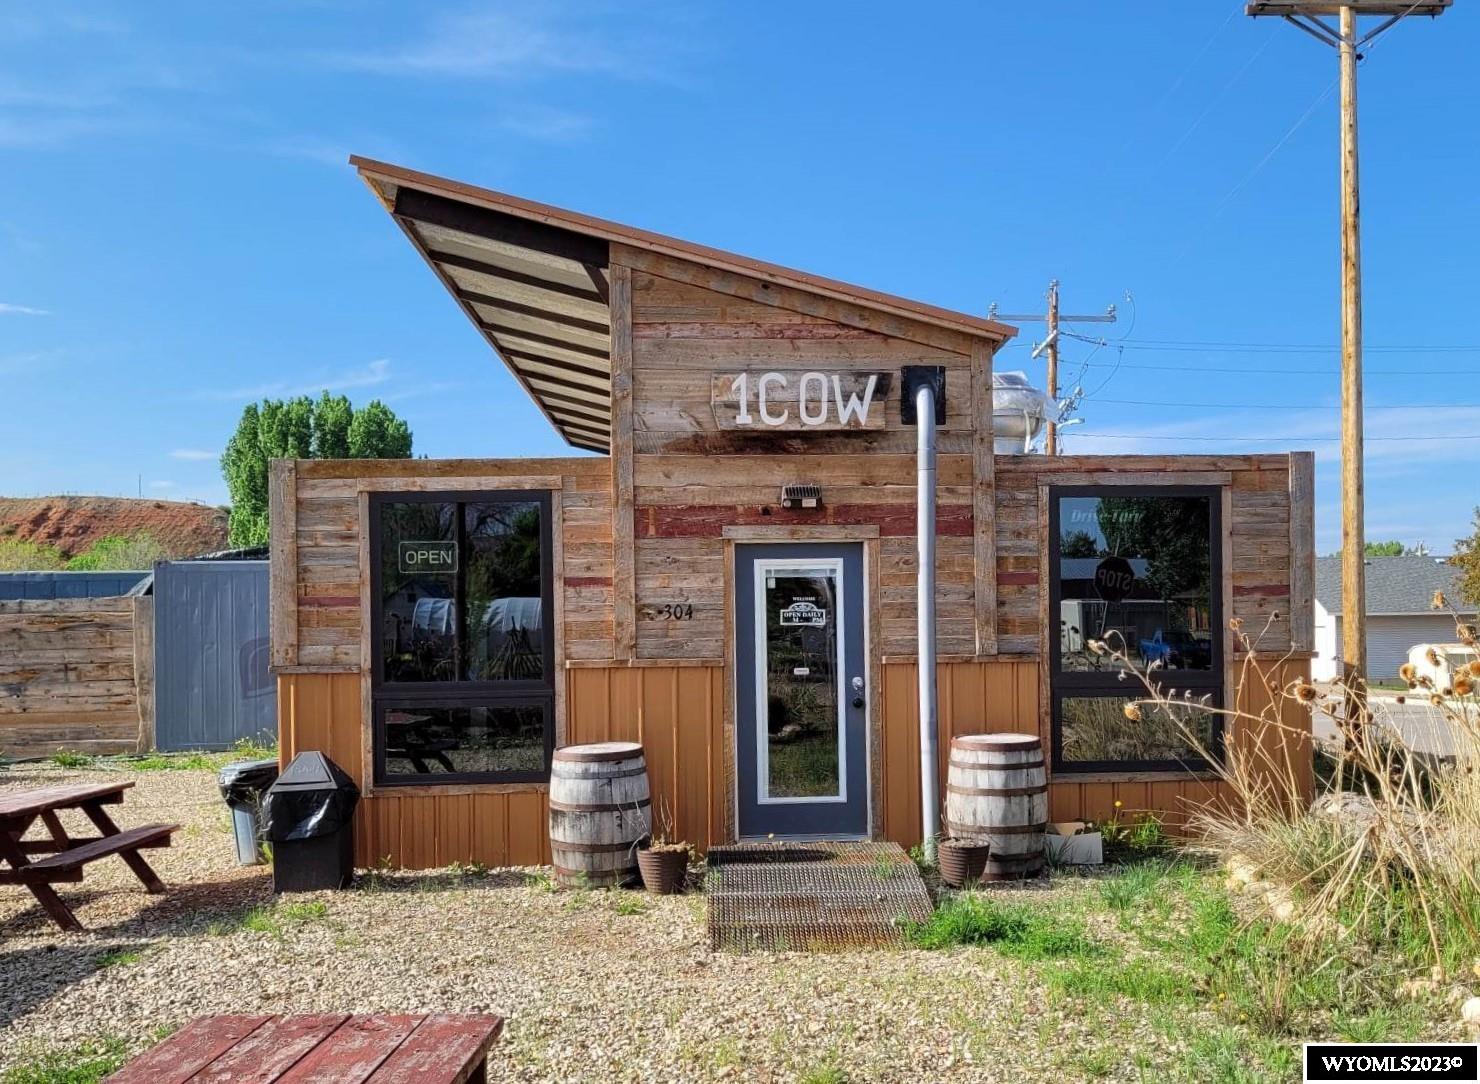 Business Opportunity!! Location is business and this one is ideal for a lot of it! Located in the heart of Ten Sleep Wyo. 1.8 acres with established restaurant business. Equipped with nearly everything you'll need. 200amp 480v service and 600amp 120/240 service on site. Existing 300sq ft of refrigerated or freezer space. Inside and outside seating, drive-up, & off-street parking. Grill, firers, grease trap, coolers and much more!This building is a certified state inspected butcher shop, certified through 12/31/23. It is also setup to be a bakery.  Retail opportunity and Highway access at the foot of the Big Horn Mountains, roughly half way between the Black Hills & Yellowstone Park. Many possibilities and potential for your business ideas, not just the food industry. Come take look!